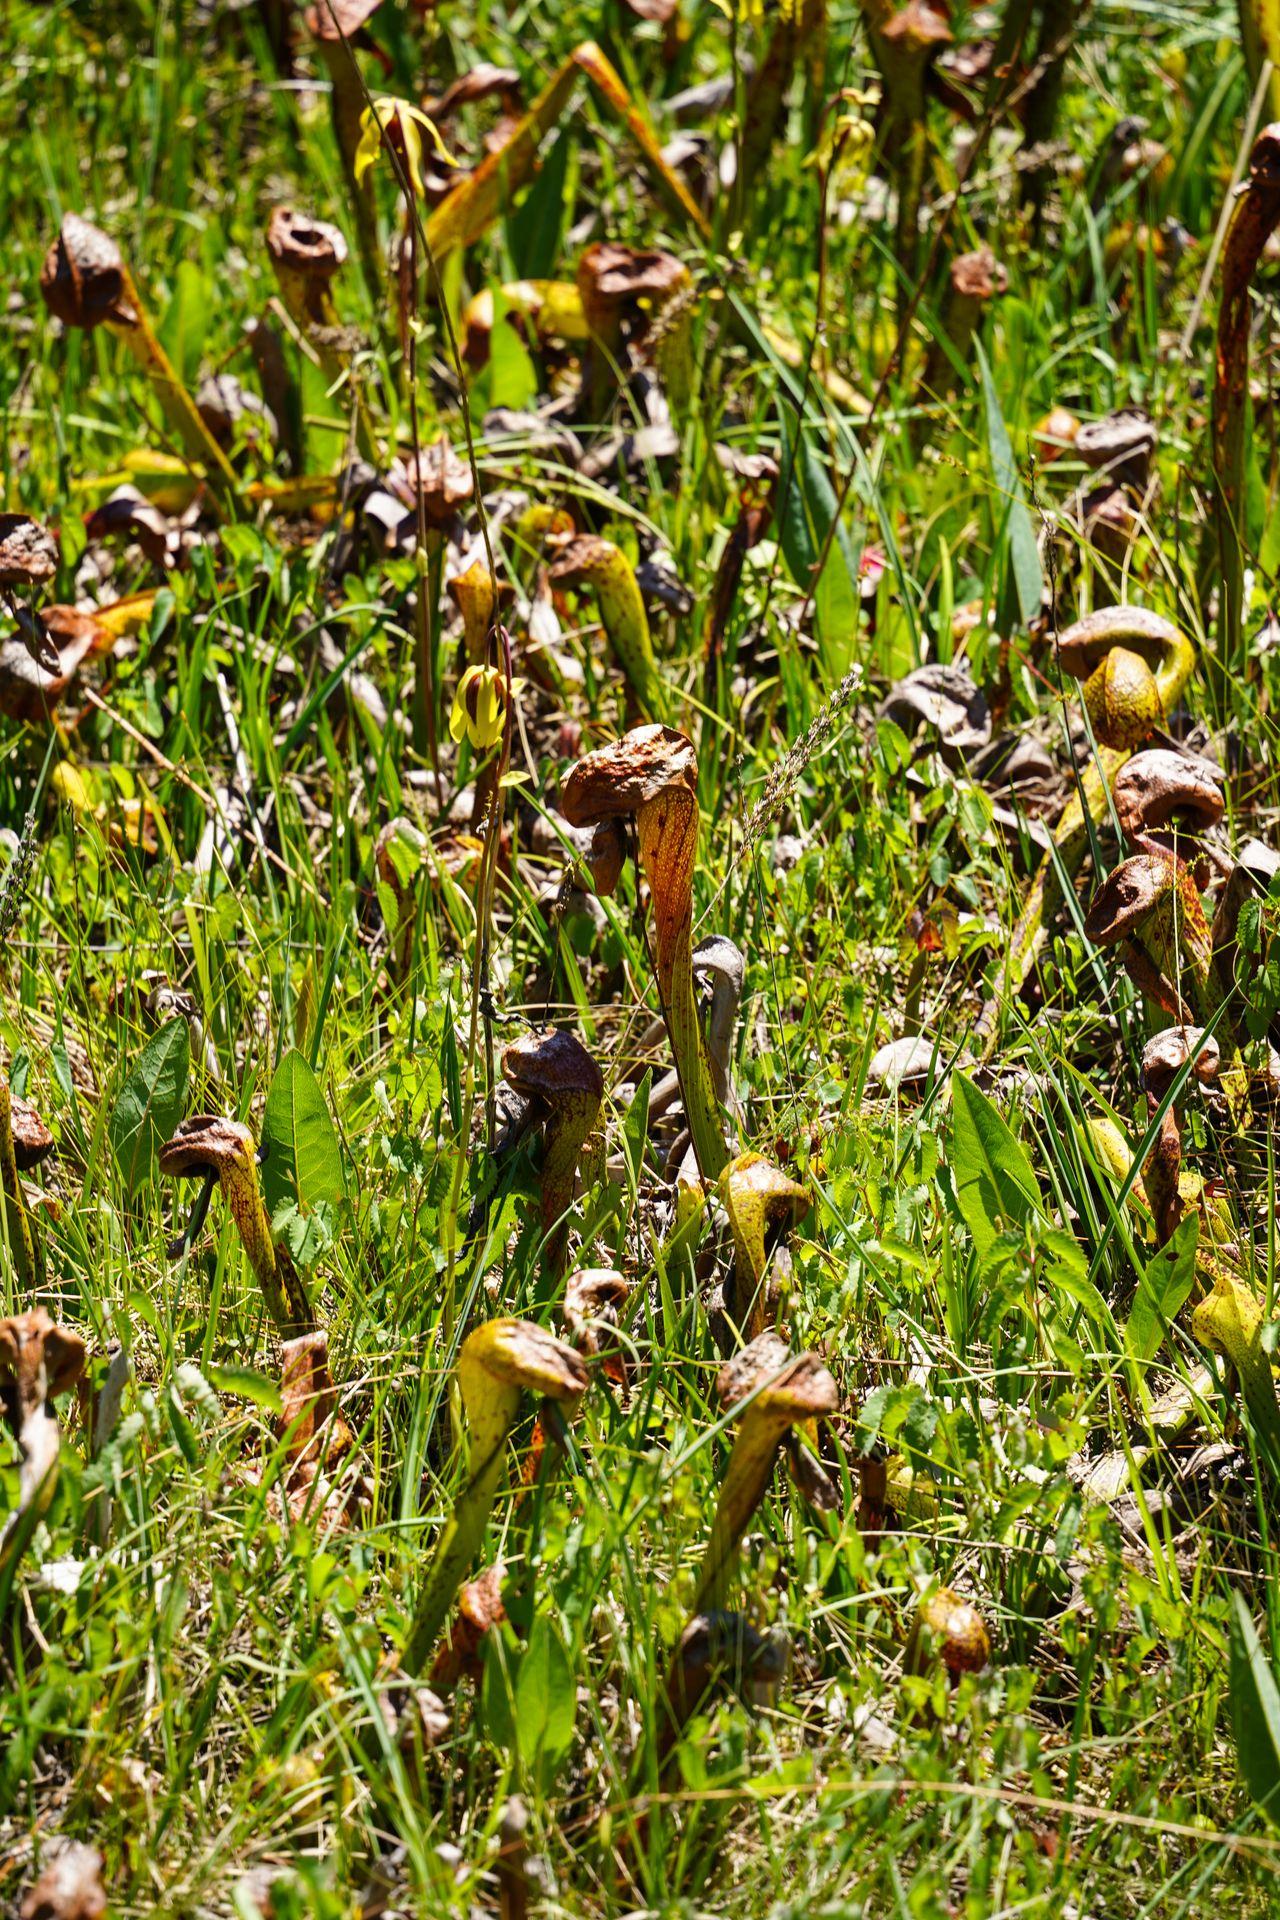 A close up of pitcher plants seen in Eight Dollar Mountain Botanical Area